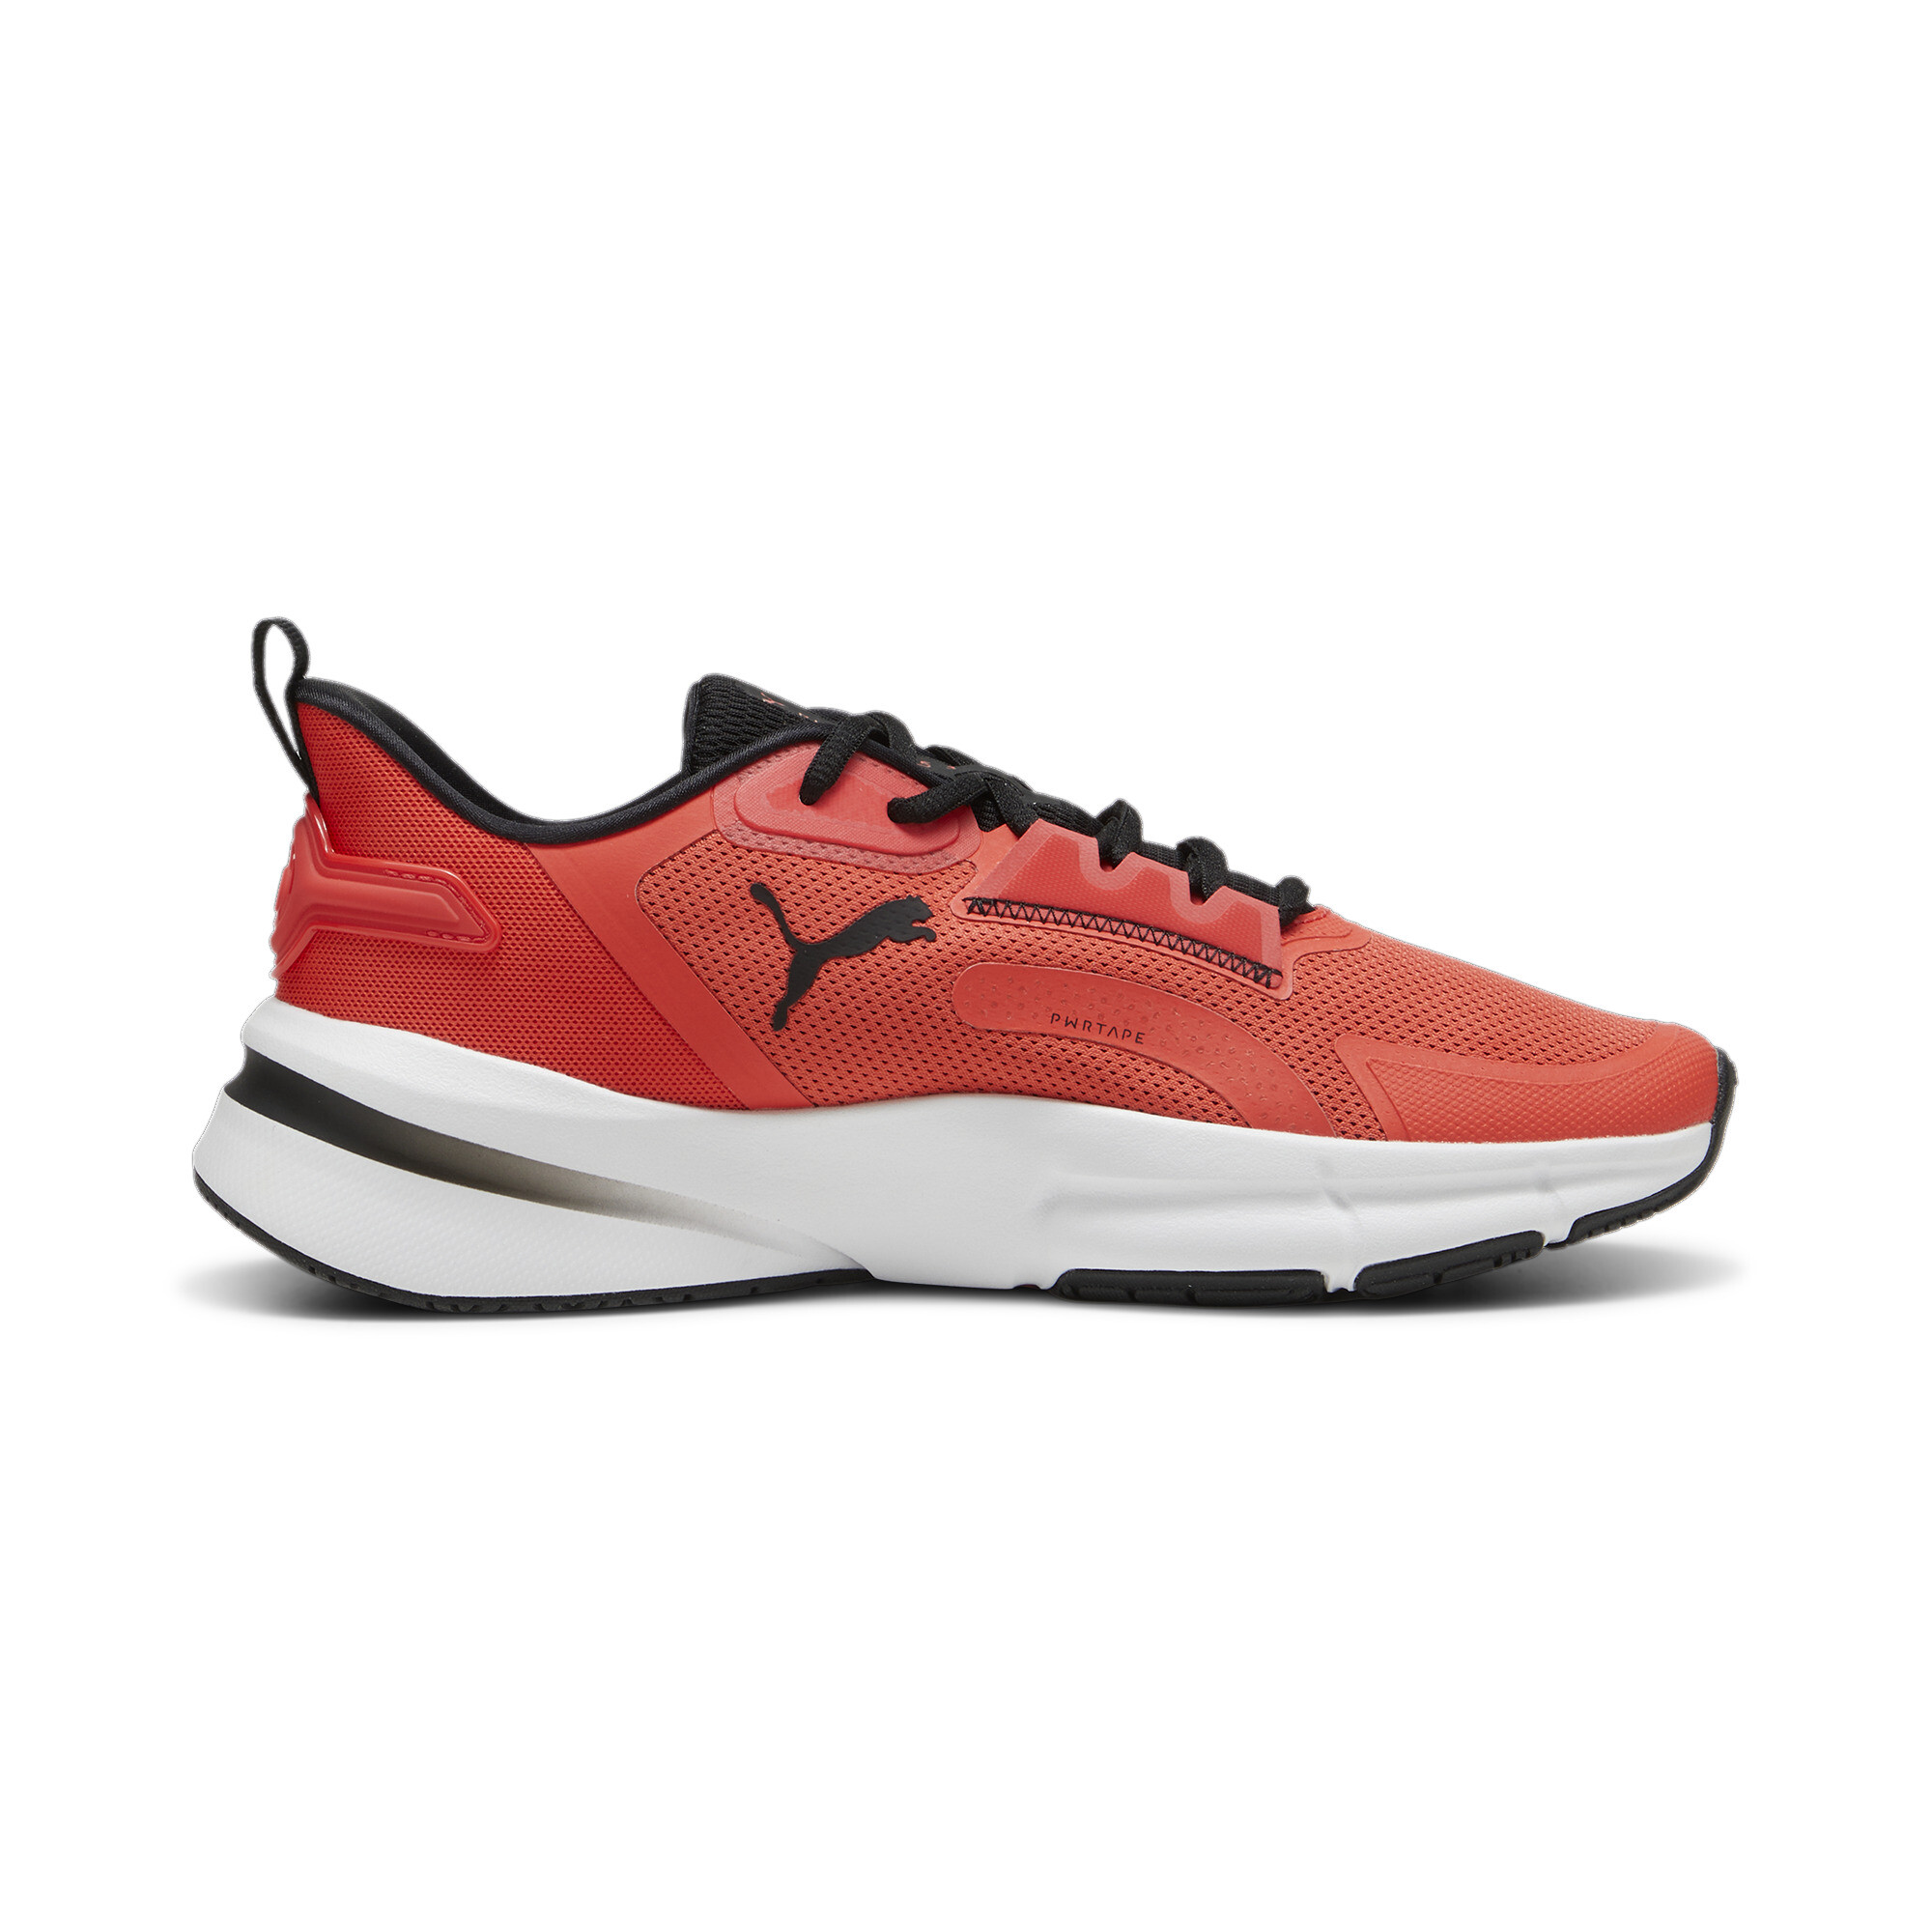 Men's PUMA PWRFrame TR 3 Training Shoes In Red, Size EU 42.5